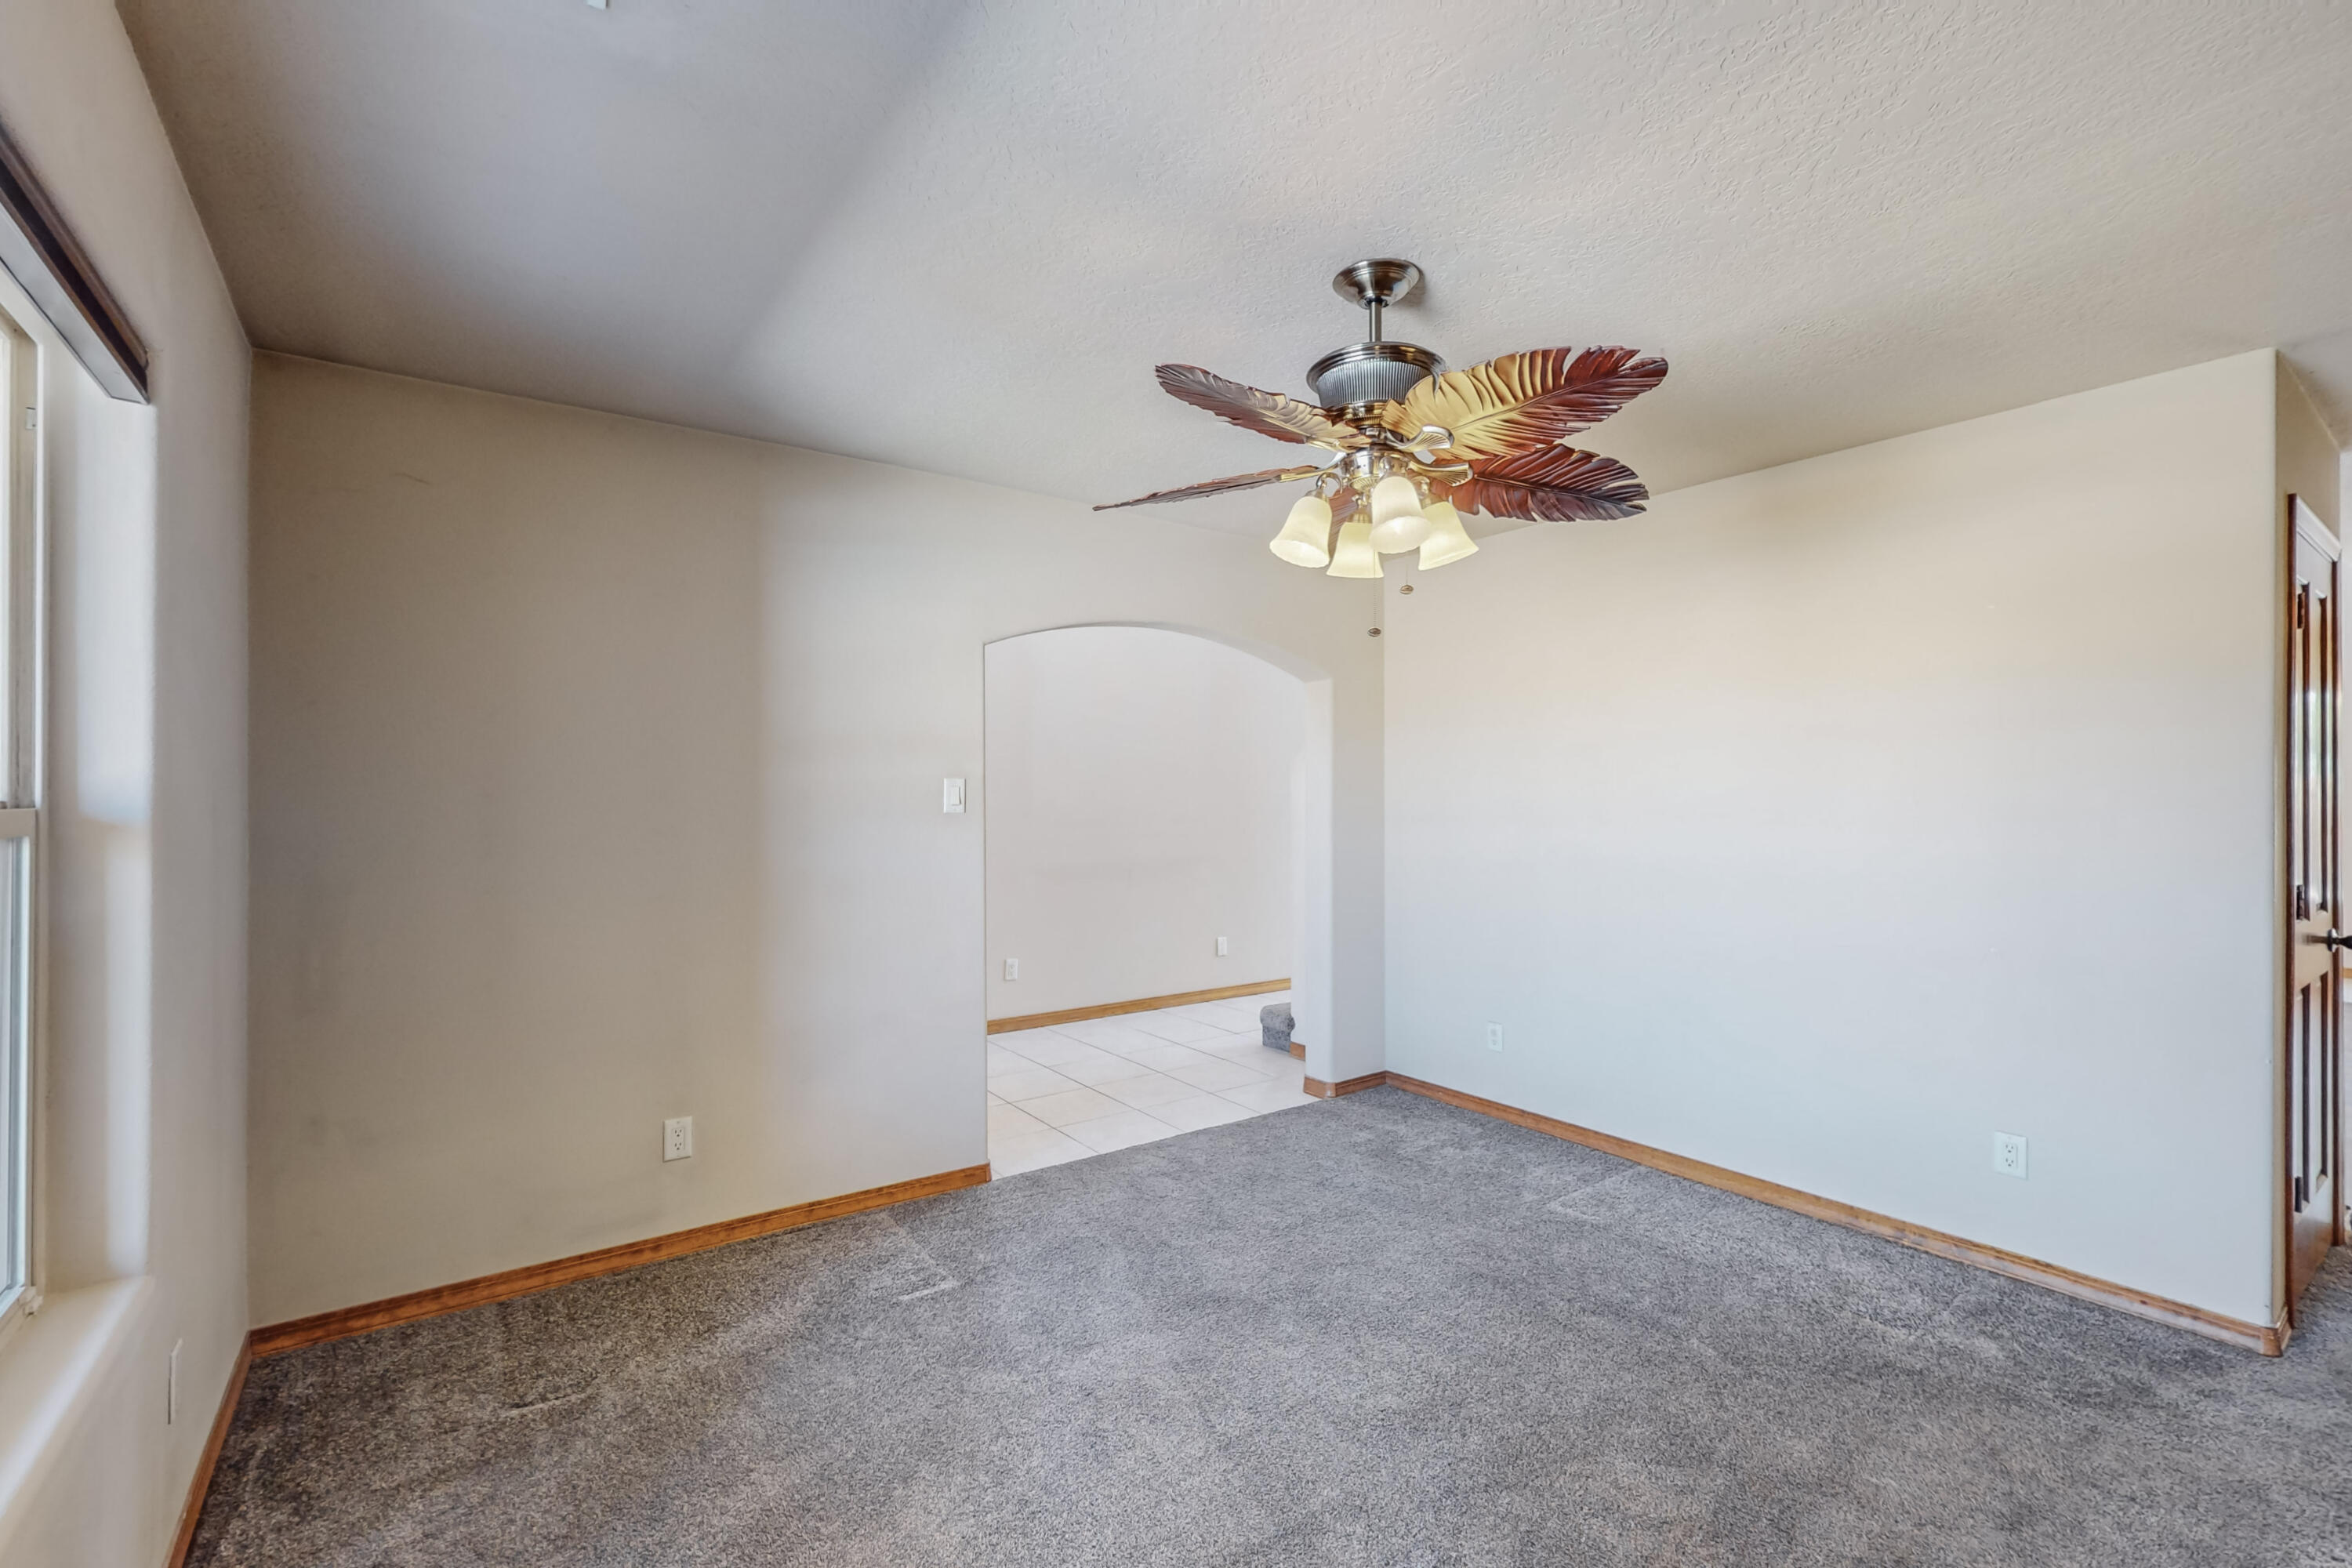 4600 Allegheny Court NW, Albuquerque, New Mexico 87114, 3 Bedrooms Bedrooms, ,3 BathroomsBathrooms,Residential,For Sale,4600 Allegheny Court NW,1041268